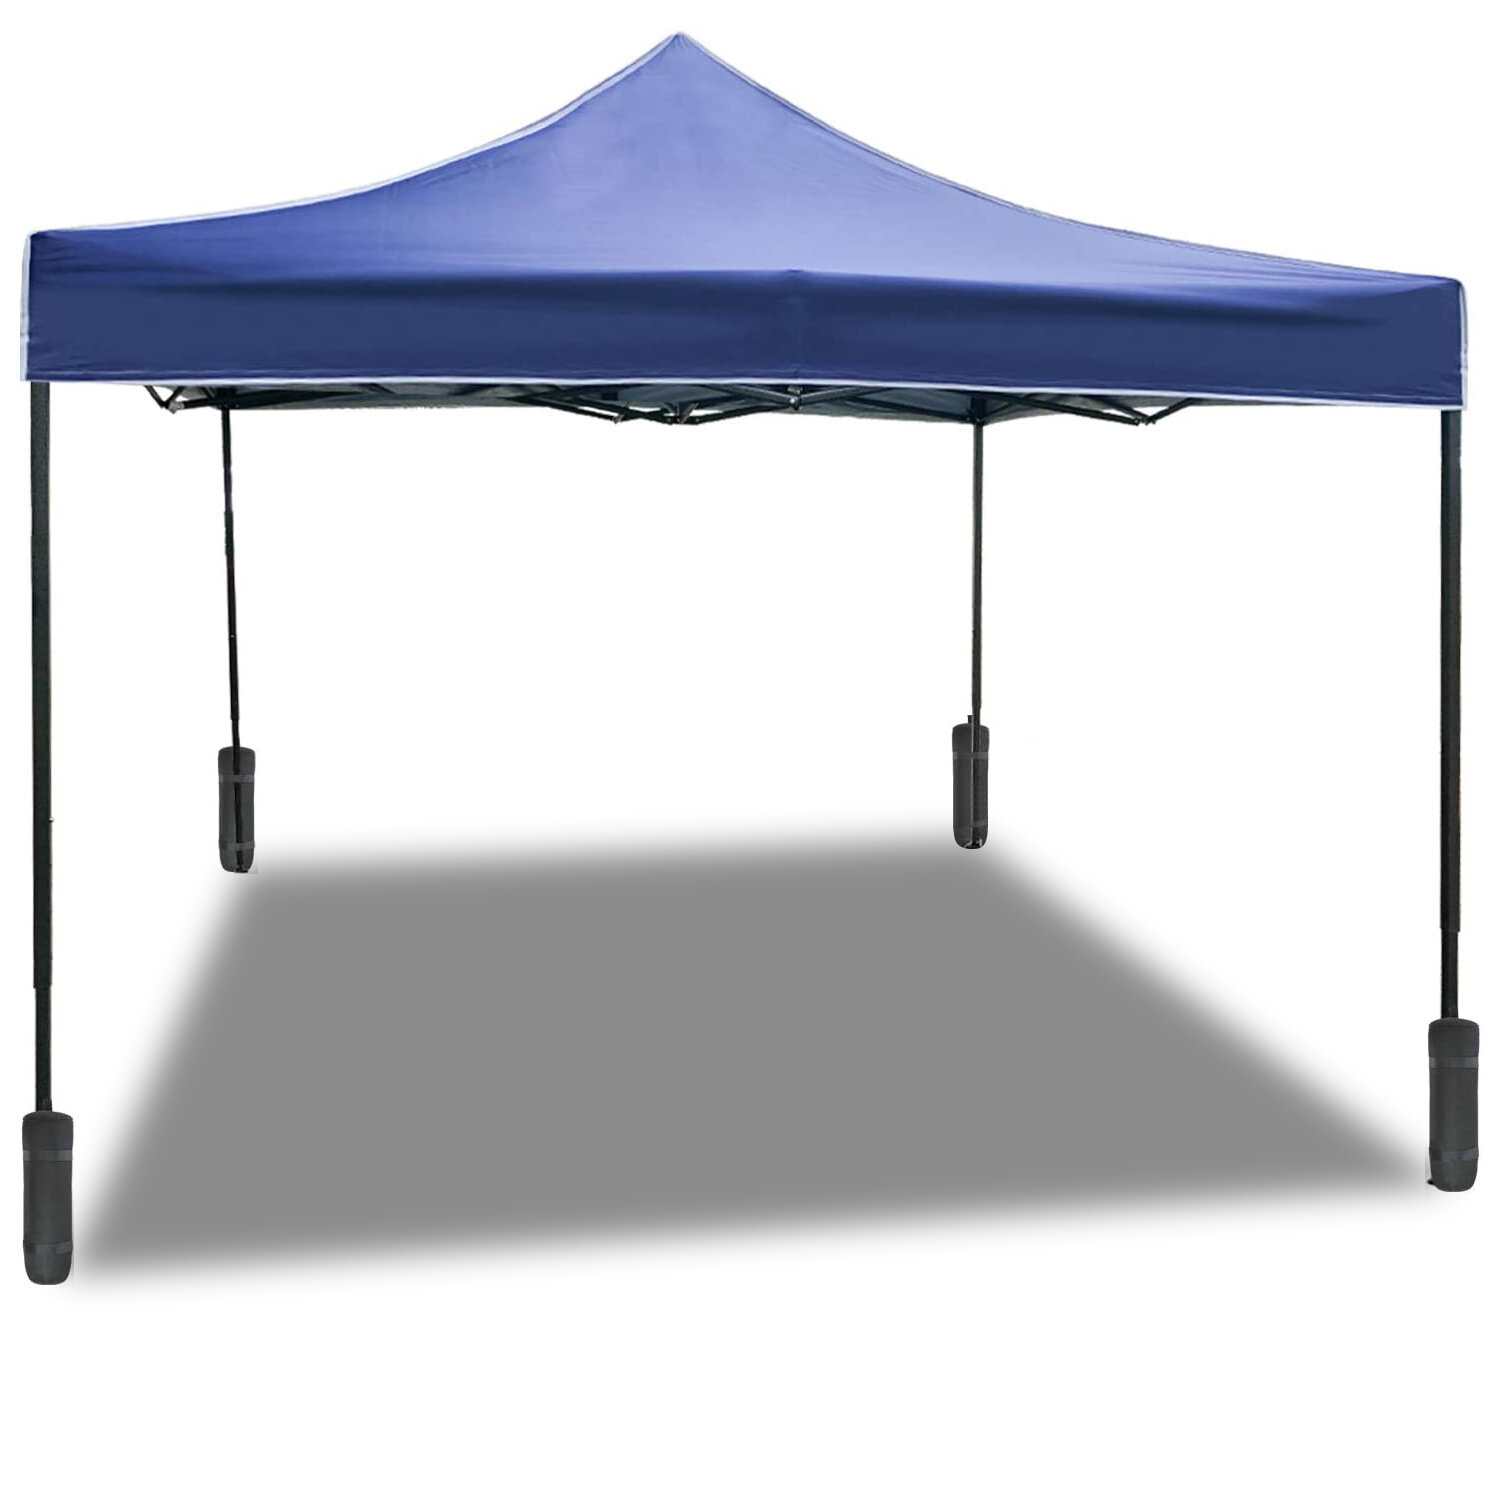 10x10 Pop Up Canopy Tent Outdoor Gazebo With Backpack Bag (blue)